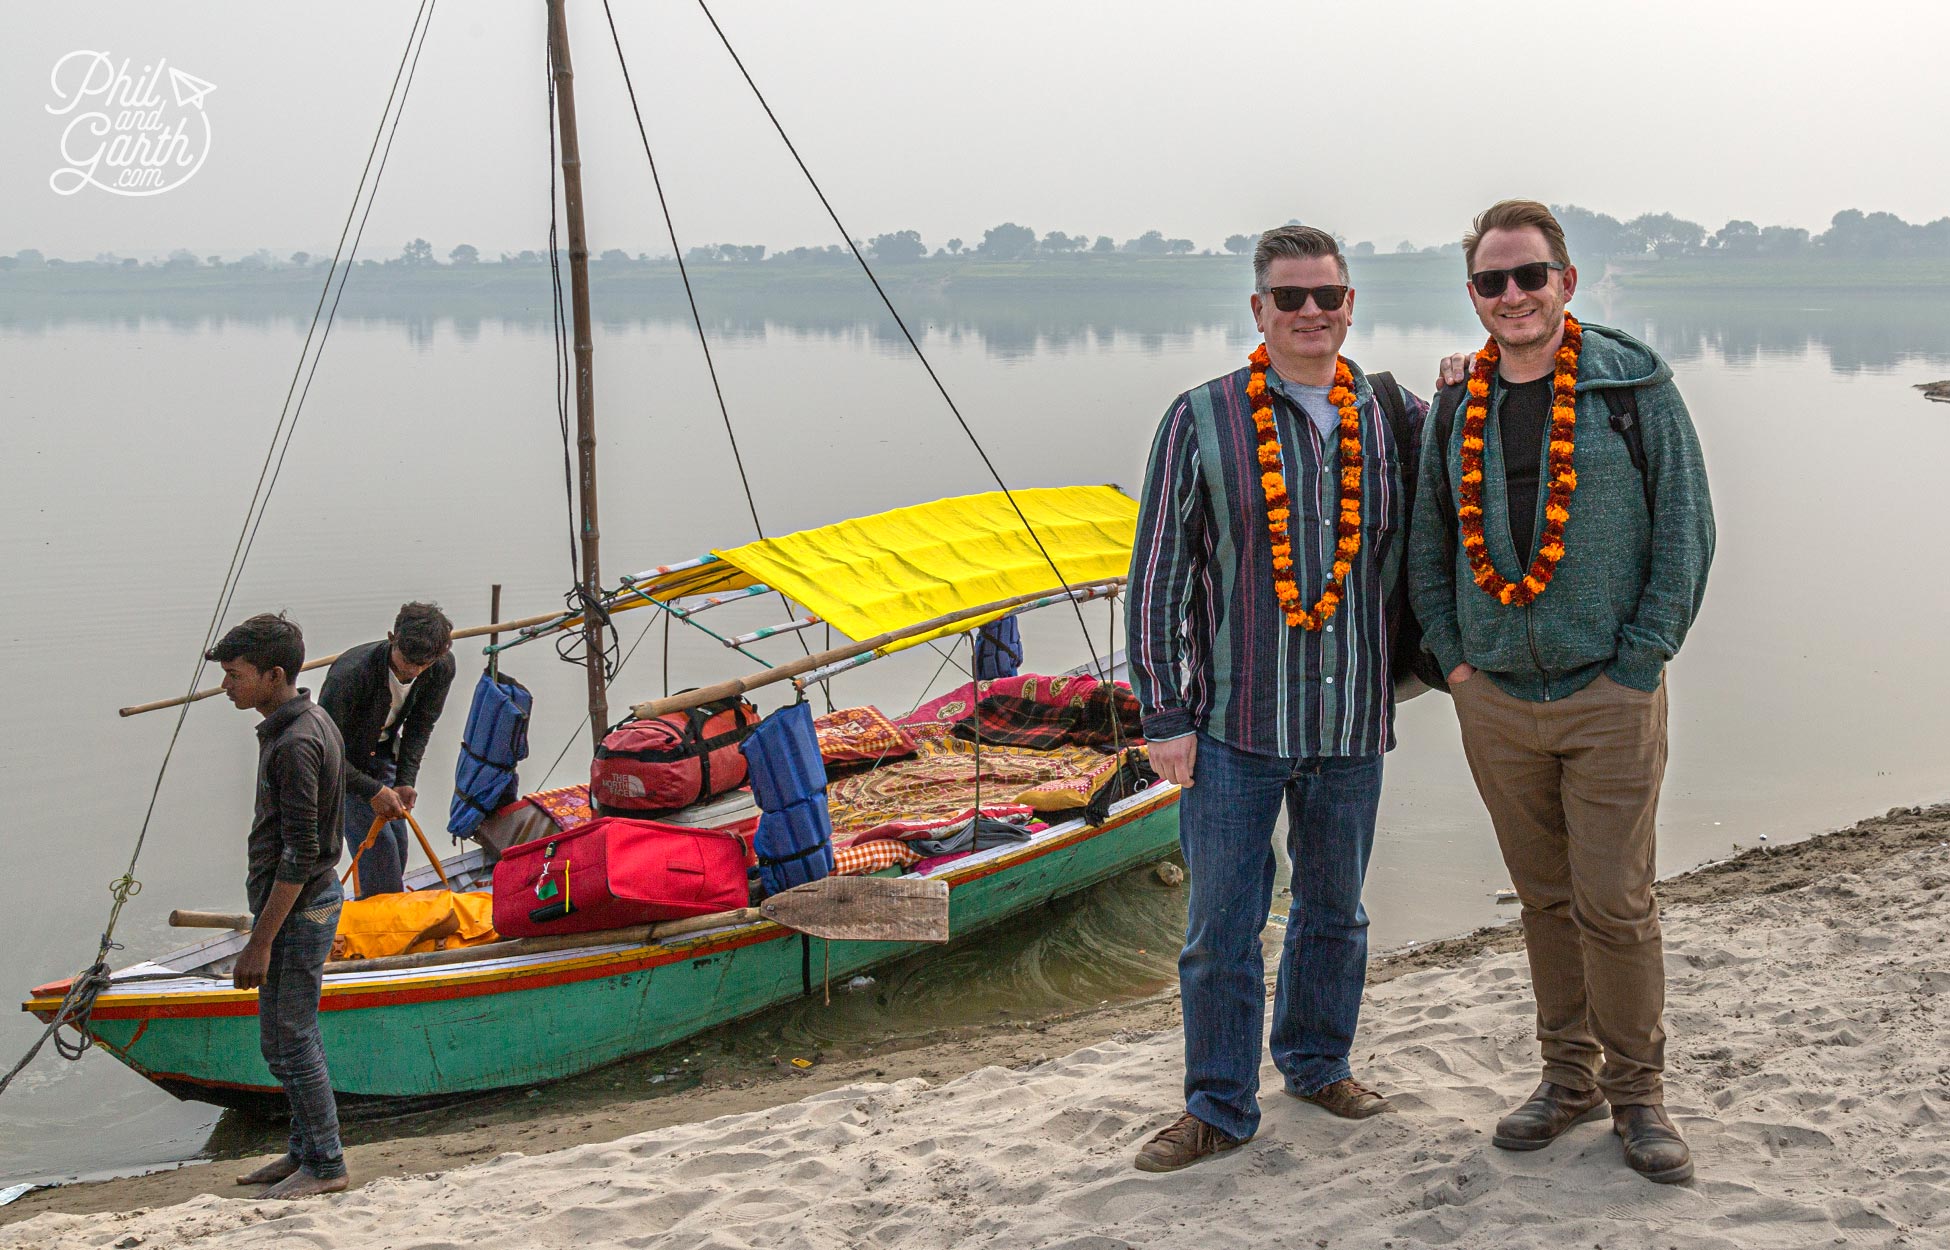 Phil and Garth's Top 5 River Ganges Camping Tips